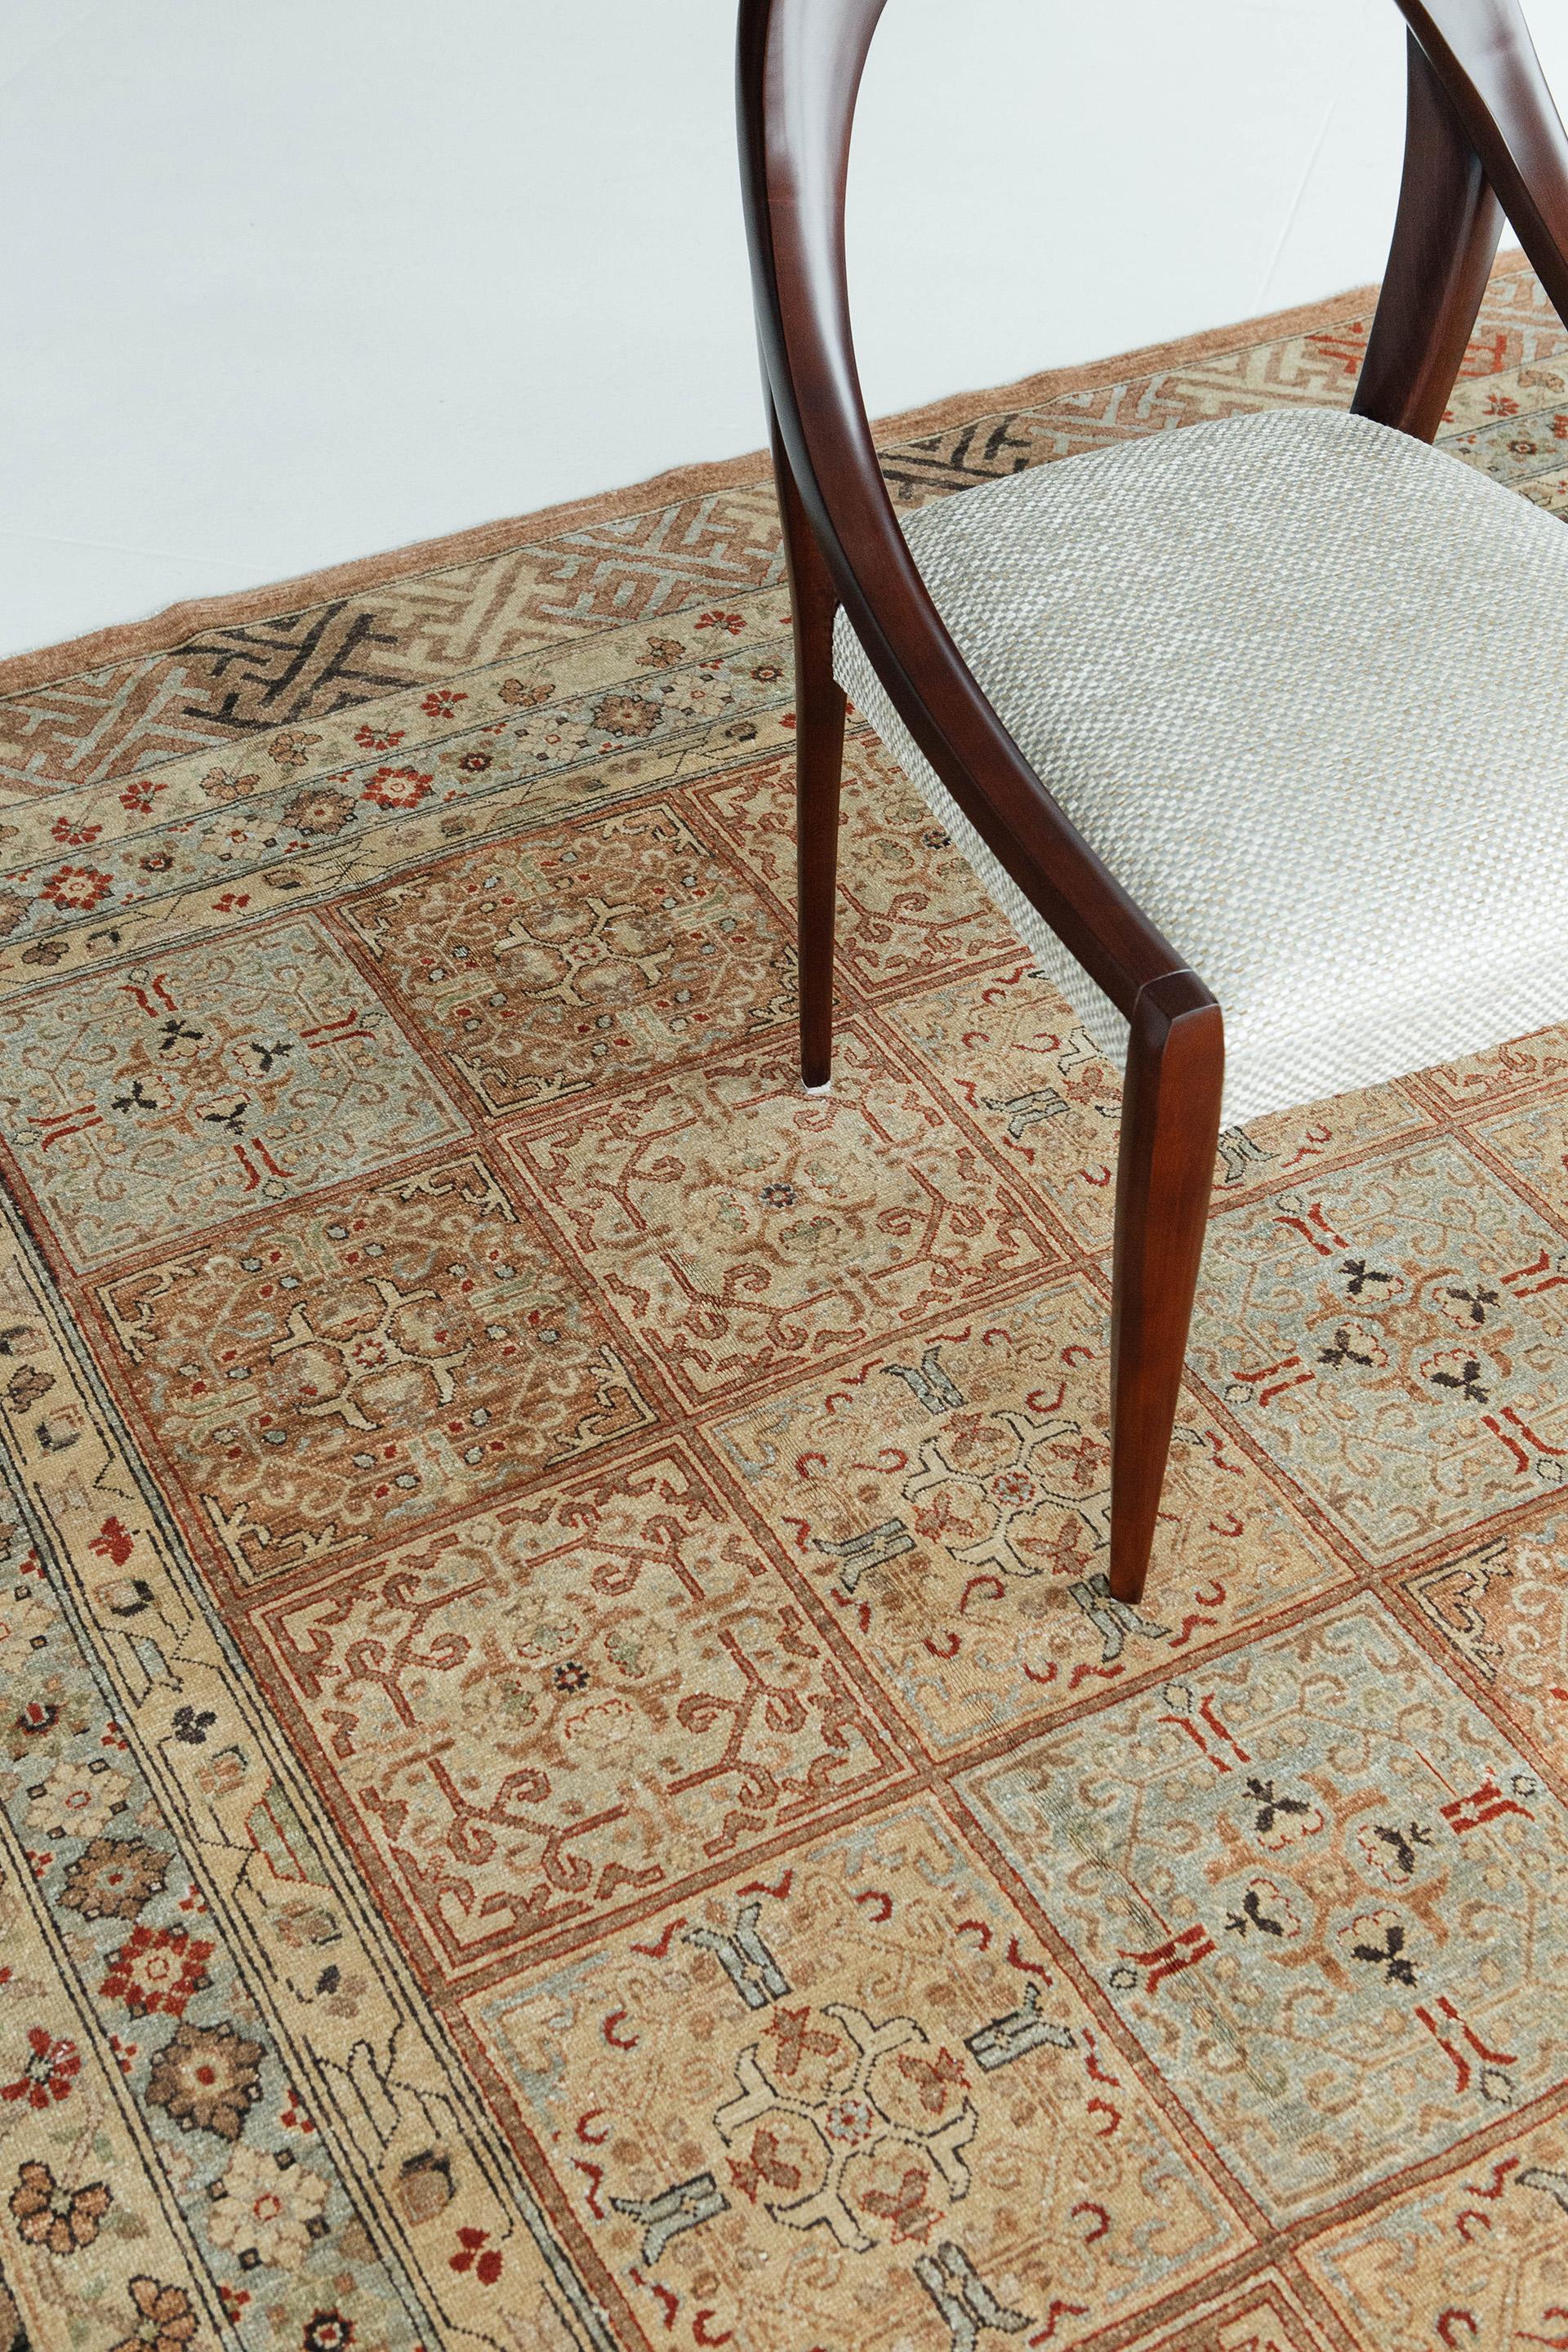 Featuring formal garden blocks and paths decorated with floral motifs, this charming antique Khotan carpet is a true work of art. The natural dyed wool colors work cohesively and create a elegant and cohesive look that will elevate any room.

Rug